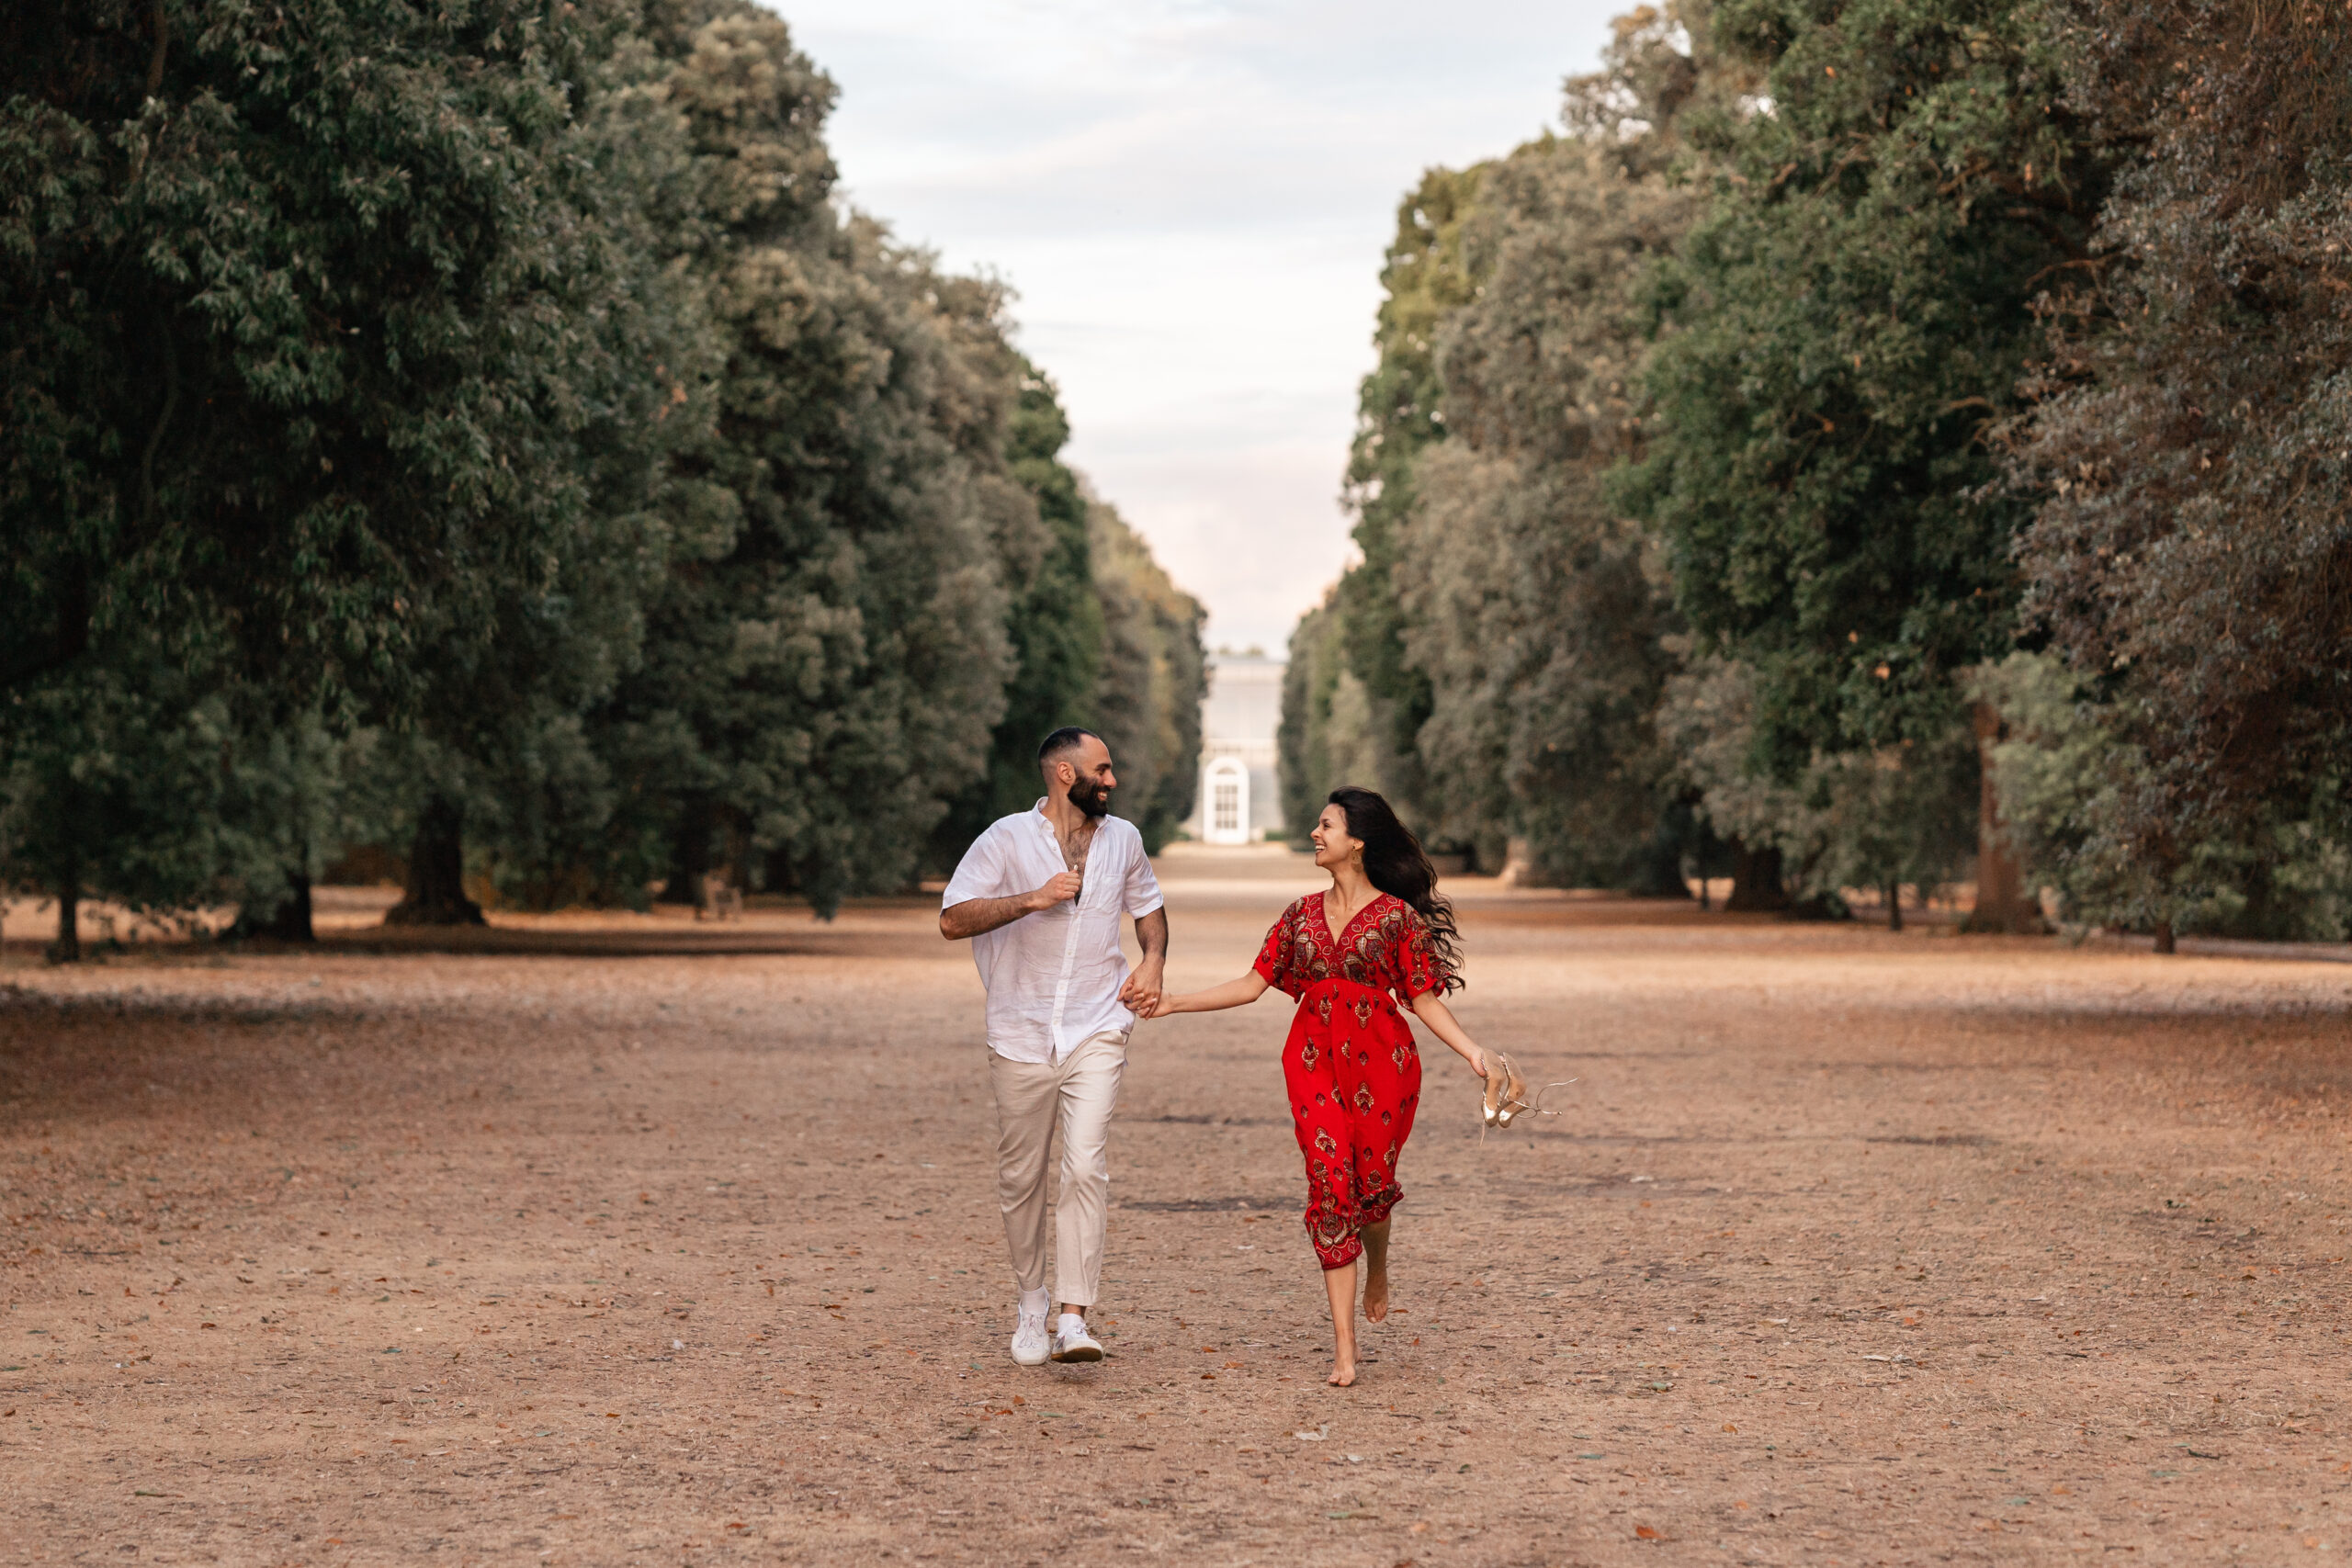 engaged couple, man wearing a white shirt, and woman wearing a red dress smile and run through the grounds of Kew Gardens in front of the Palm House